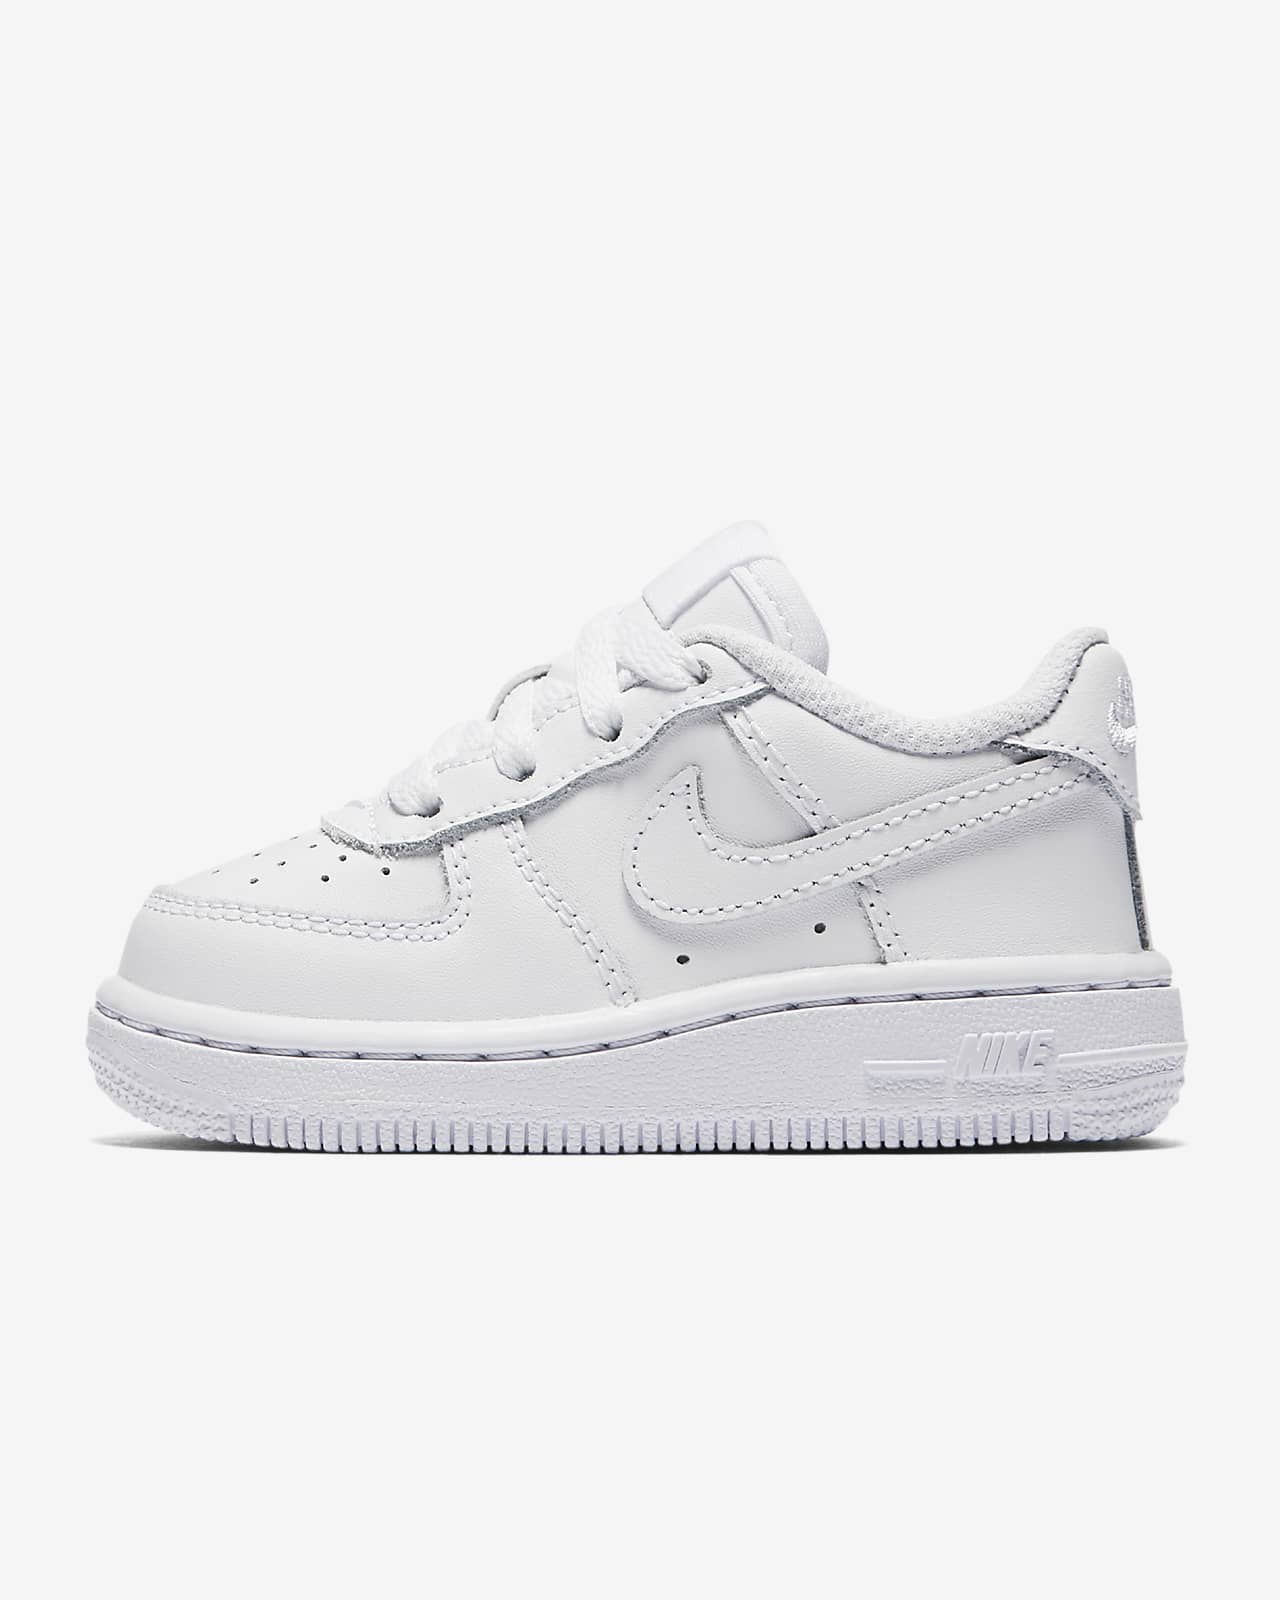 white nike air force 1 youth